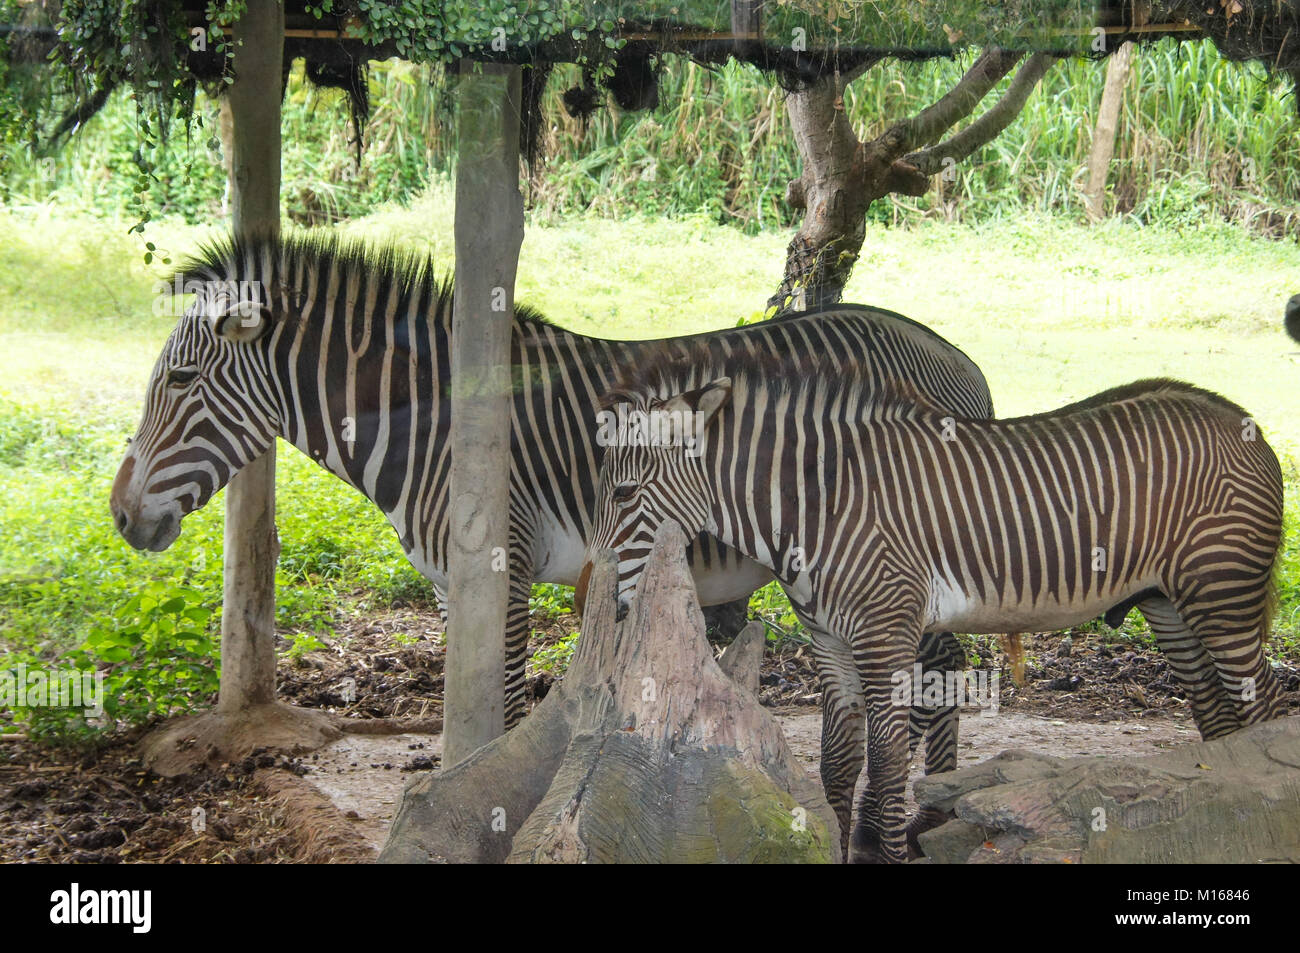 a small Zebra in the zoo of Thailand Stock Photo